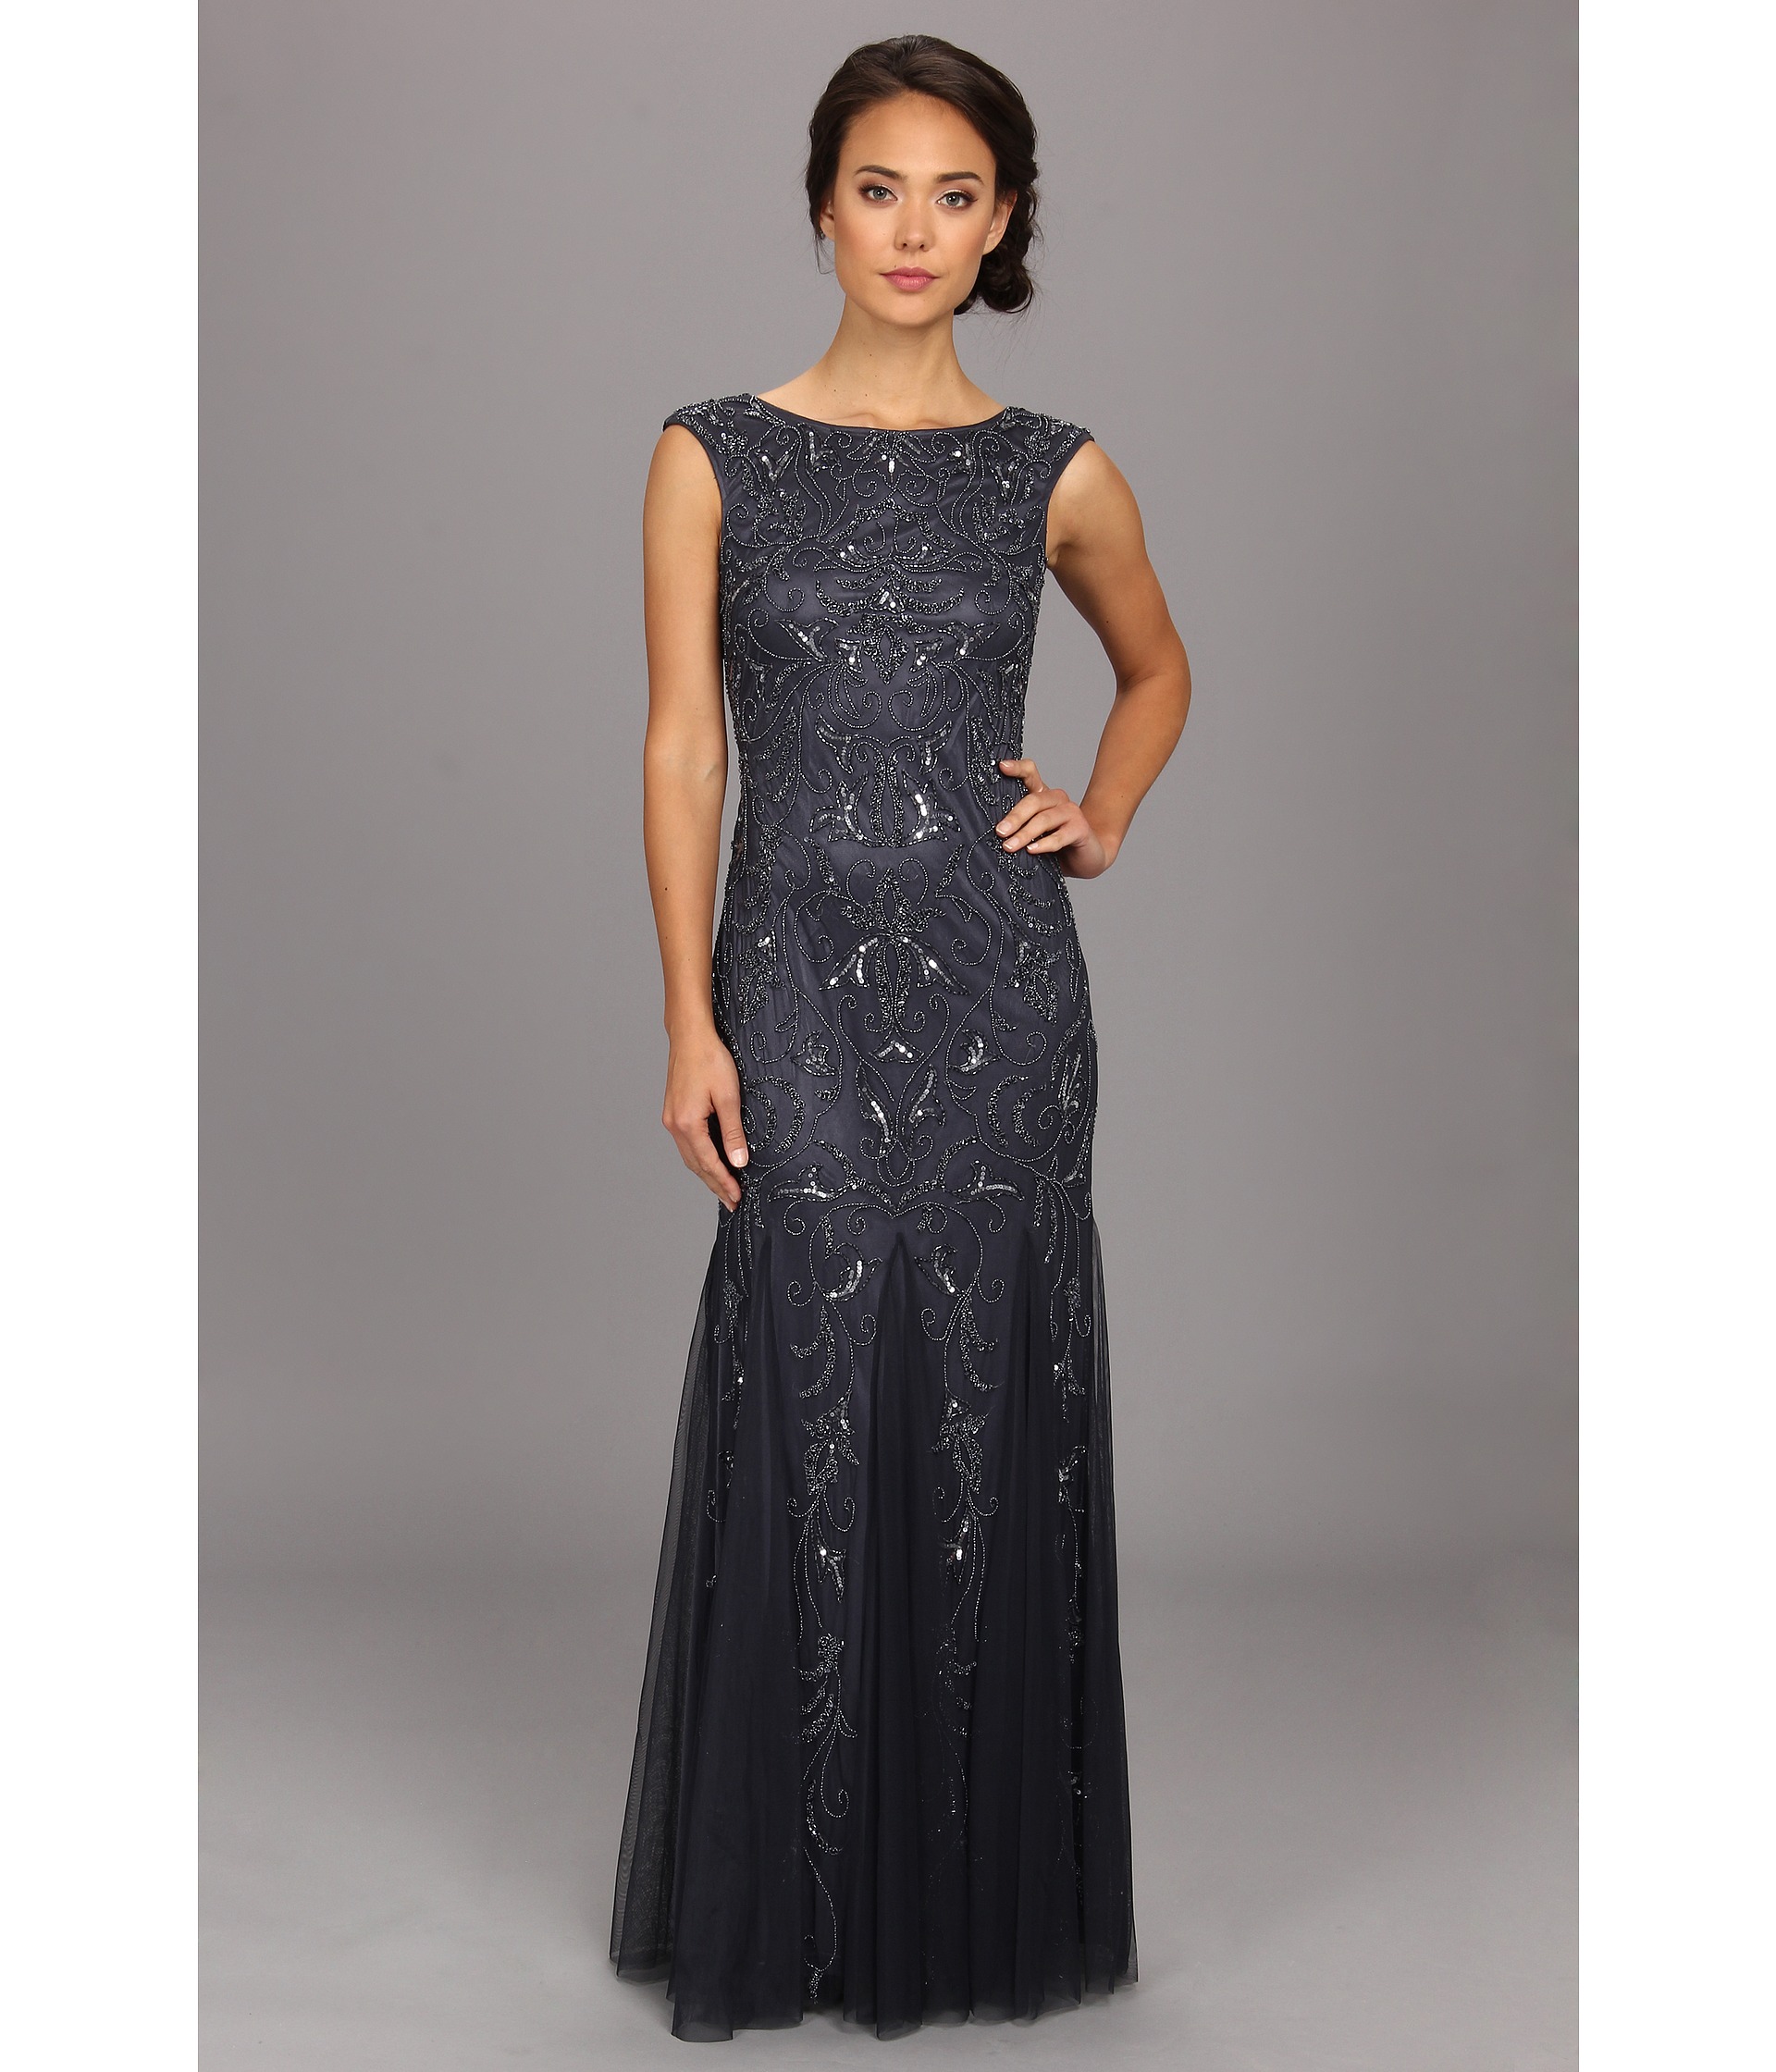 Adrianna Papell Cap Sleeve Beaded Gown Charcoal